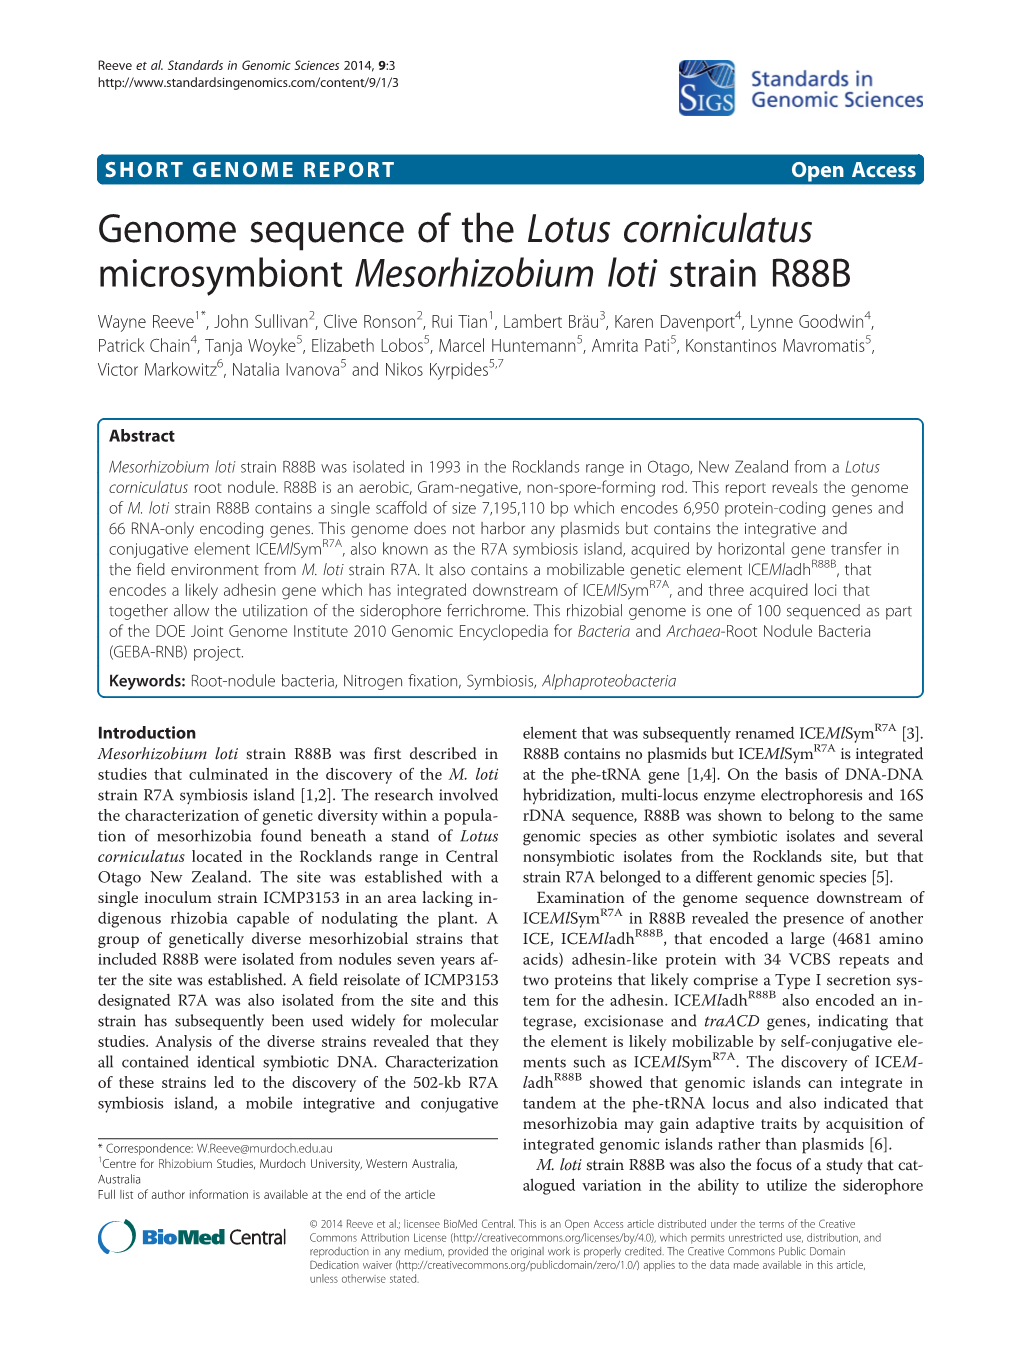 Genome Sequence of the Lotus Corniculatus Microsymbiont